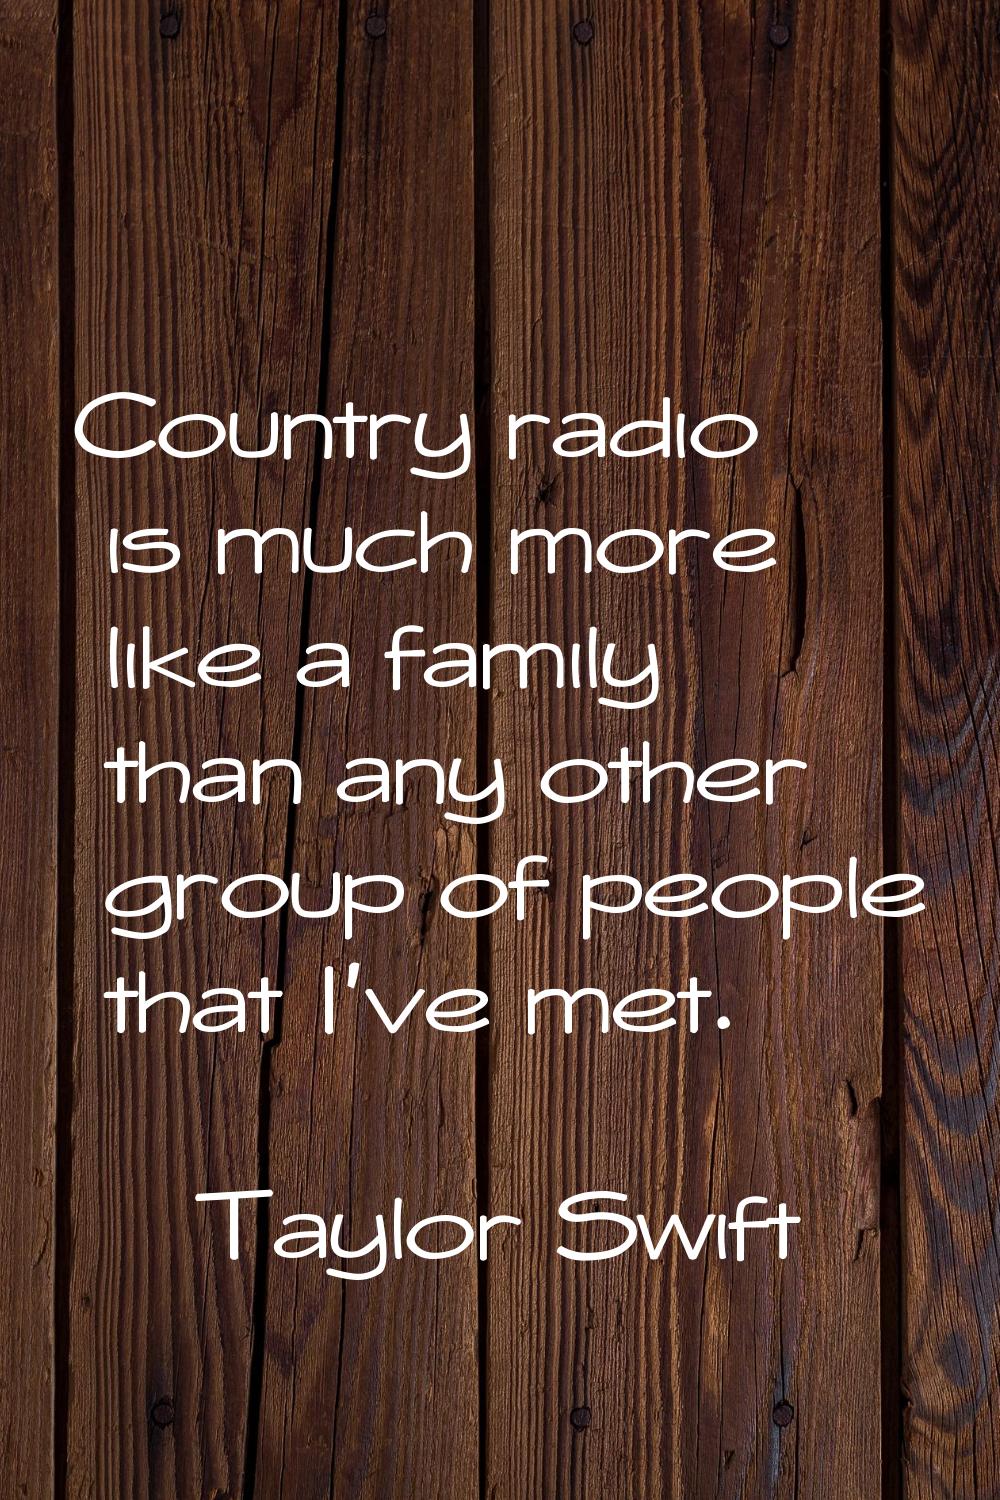 Country radio is much more like a family than any other group of people that I've met.